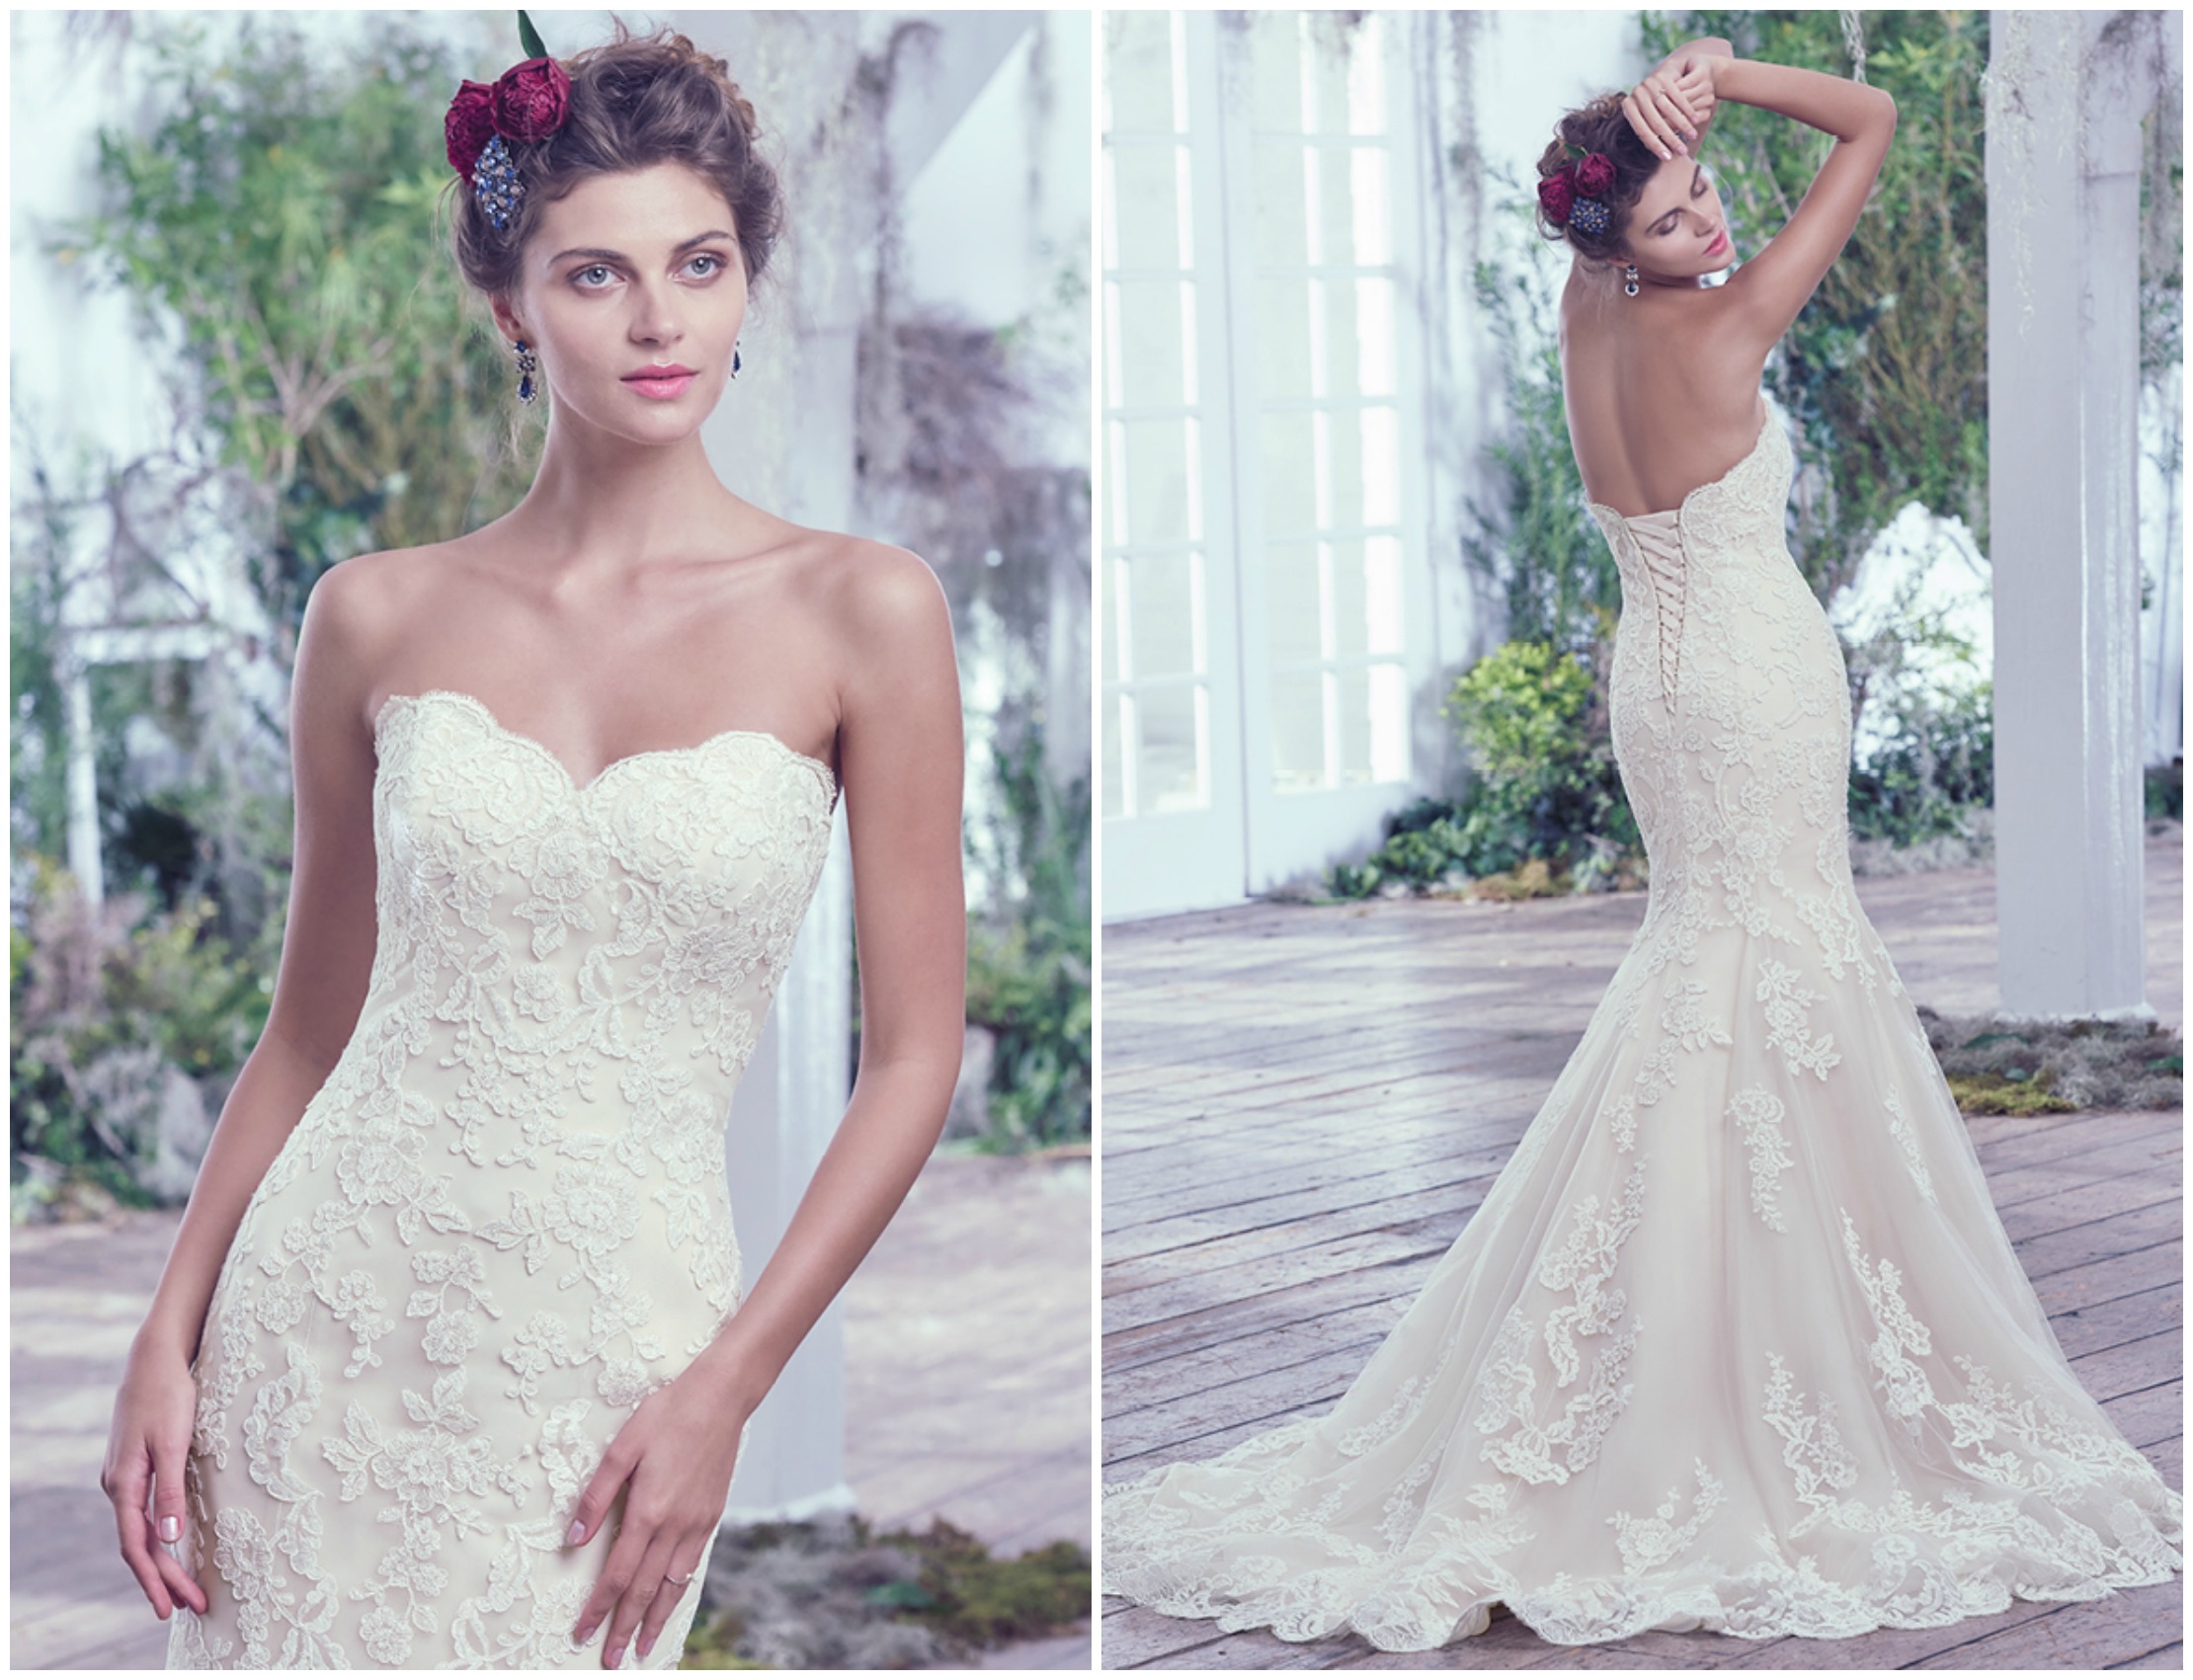 Lace artfully placed atop tulle adds sophistication to this feminine fit and flare wedding dress. Finished with a soft sweetheart neckline, scalloped hemline, and corset closure. 

<a href="https://www.maggiesottero.com/maggie-sottero/valerie/9694" target="_blank">Maggie Sottero</a>